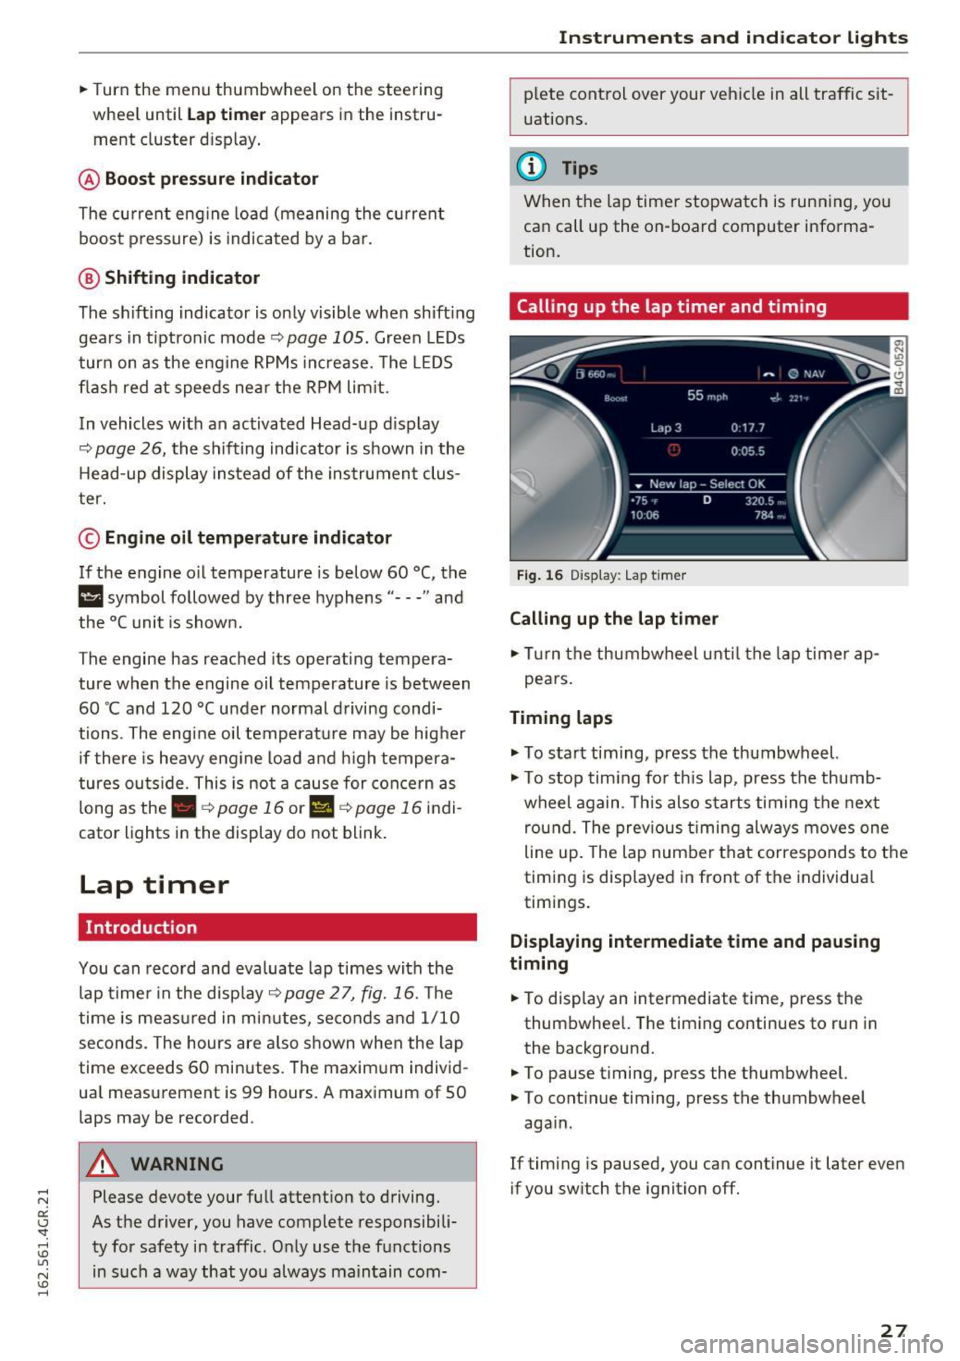 AUDI RS7 SPORTBACK 2016 Owners Manual .. Turn  the  menu  thumbwheel  on  the steering 
whee l until 
Lap timer appears  in the  instru­
ment  cluster  display . 
@ Boost pressure indicator 
The  current  engine load  (meaning  the  curr